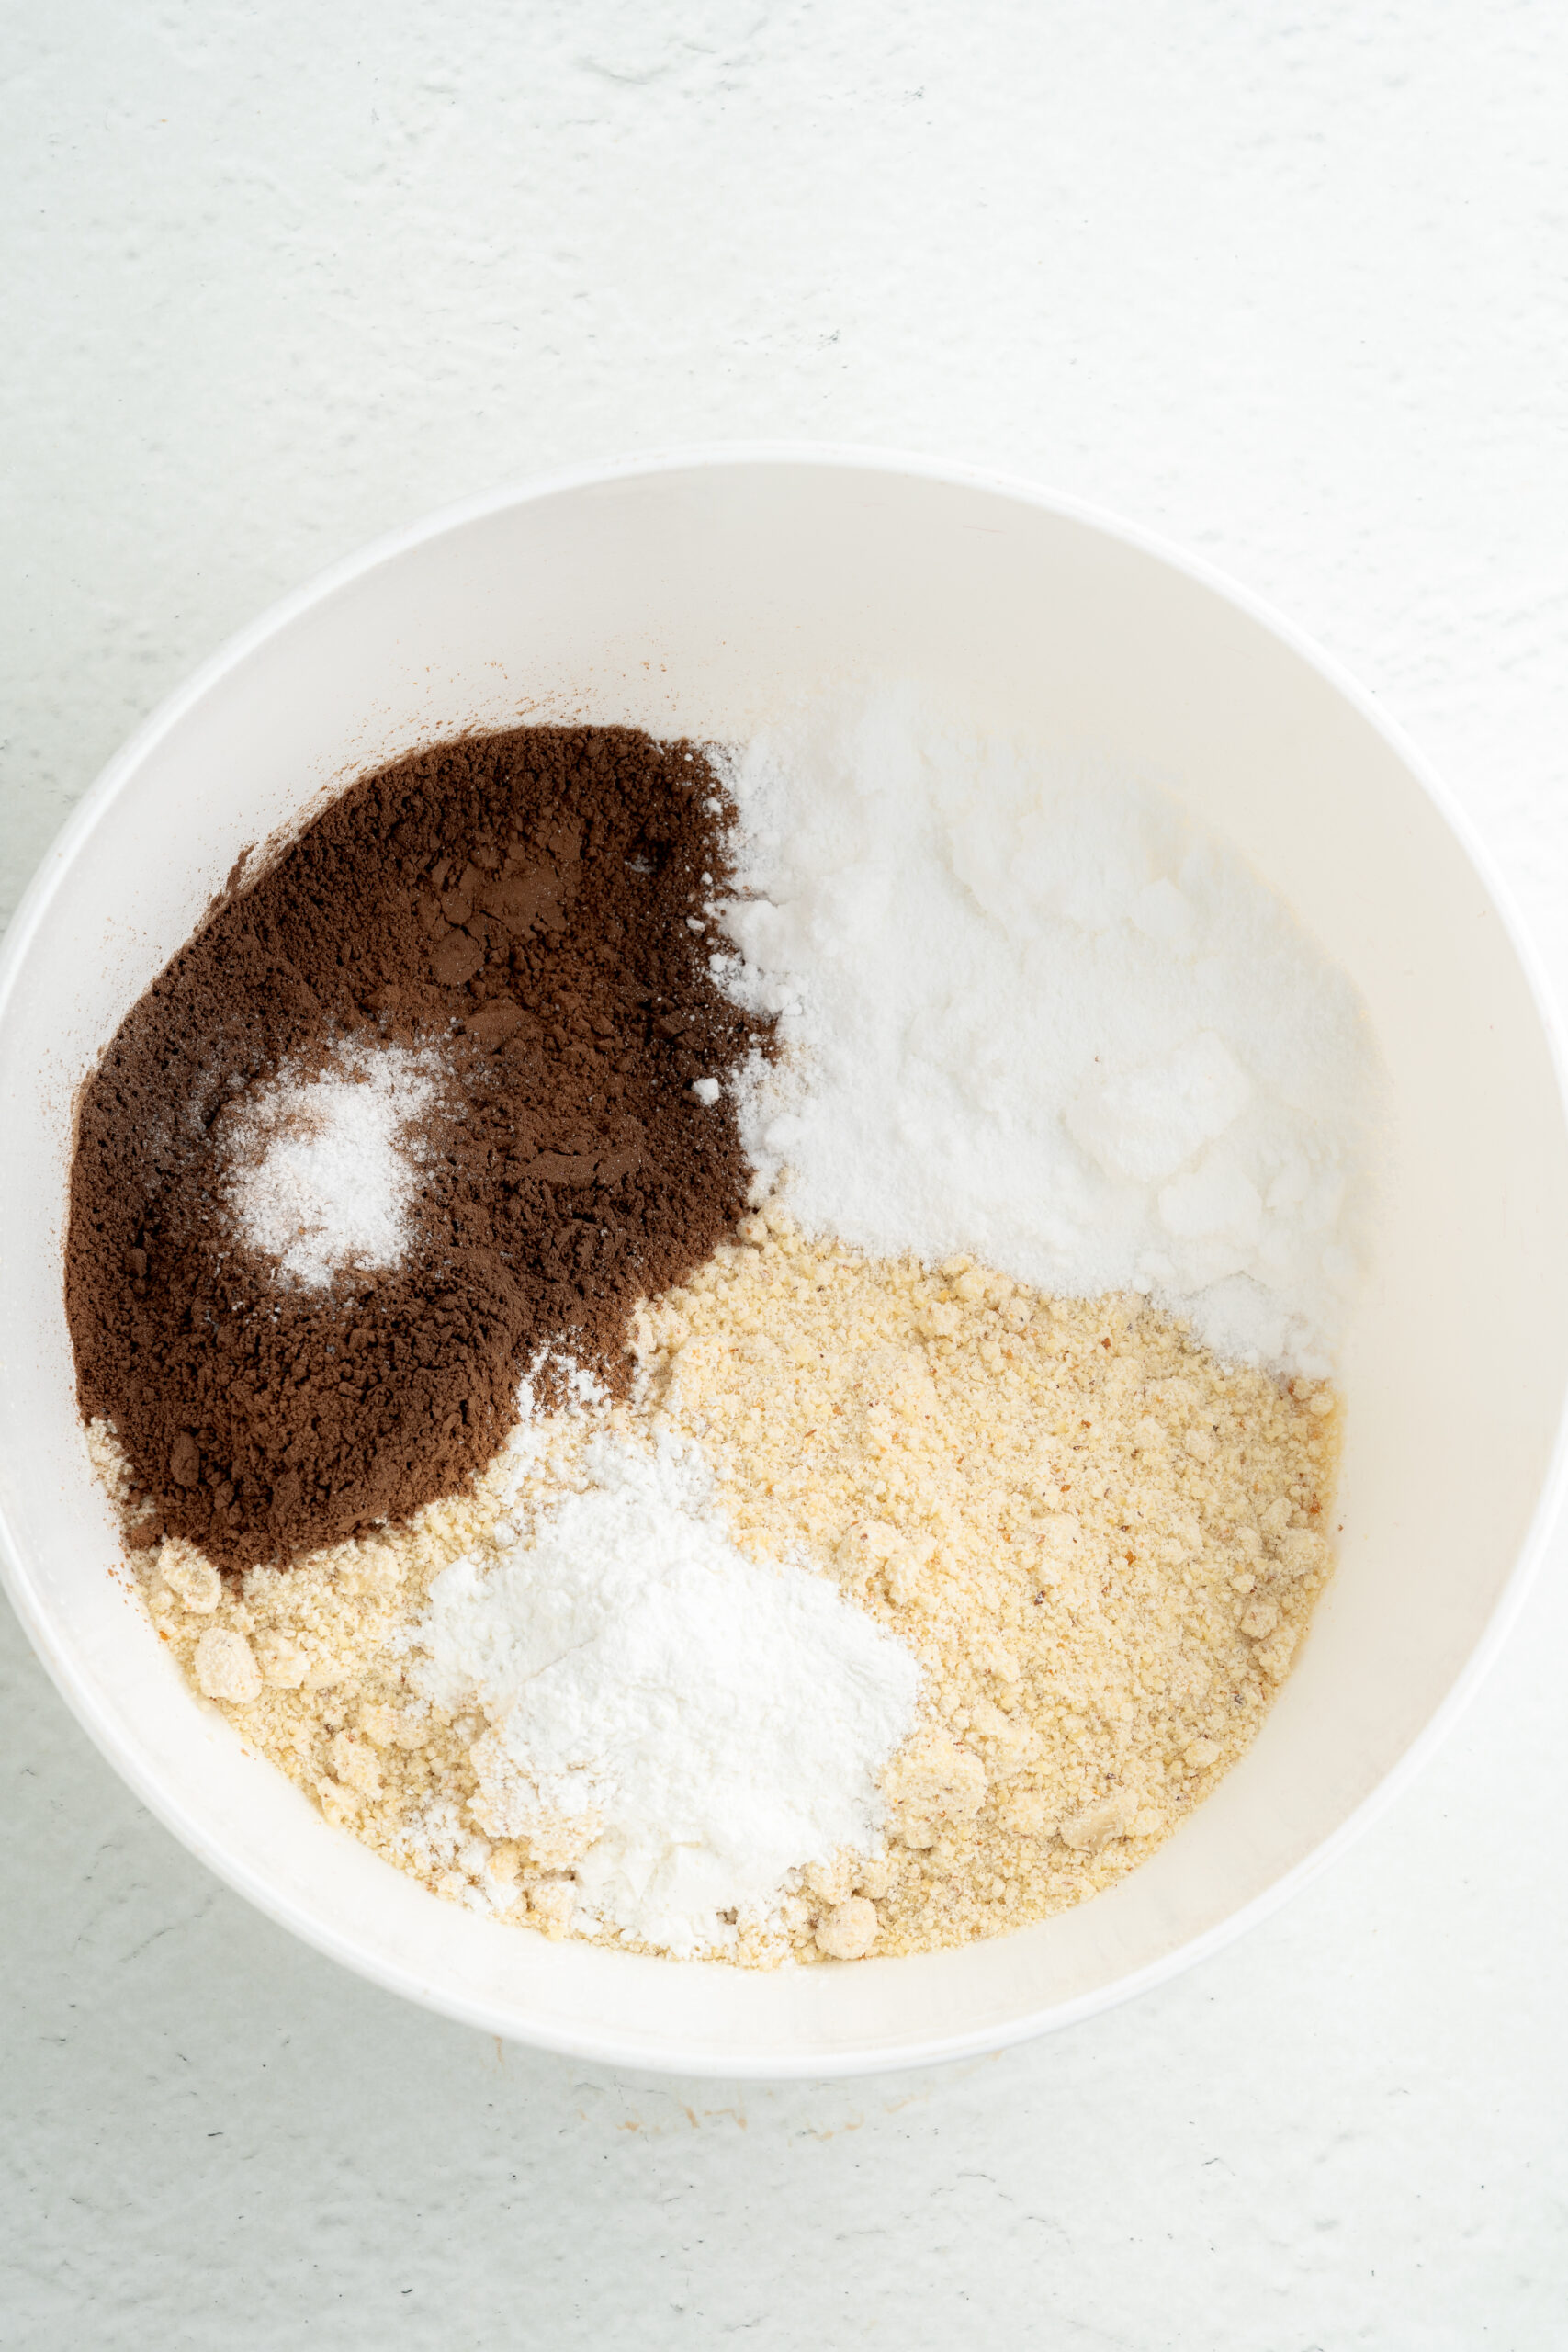 Dry ingredients in another mixing bowl.